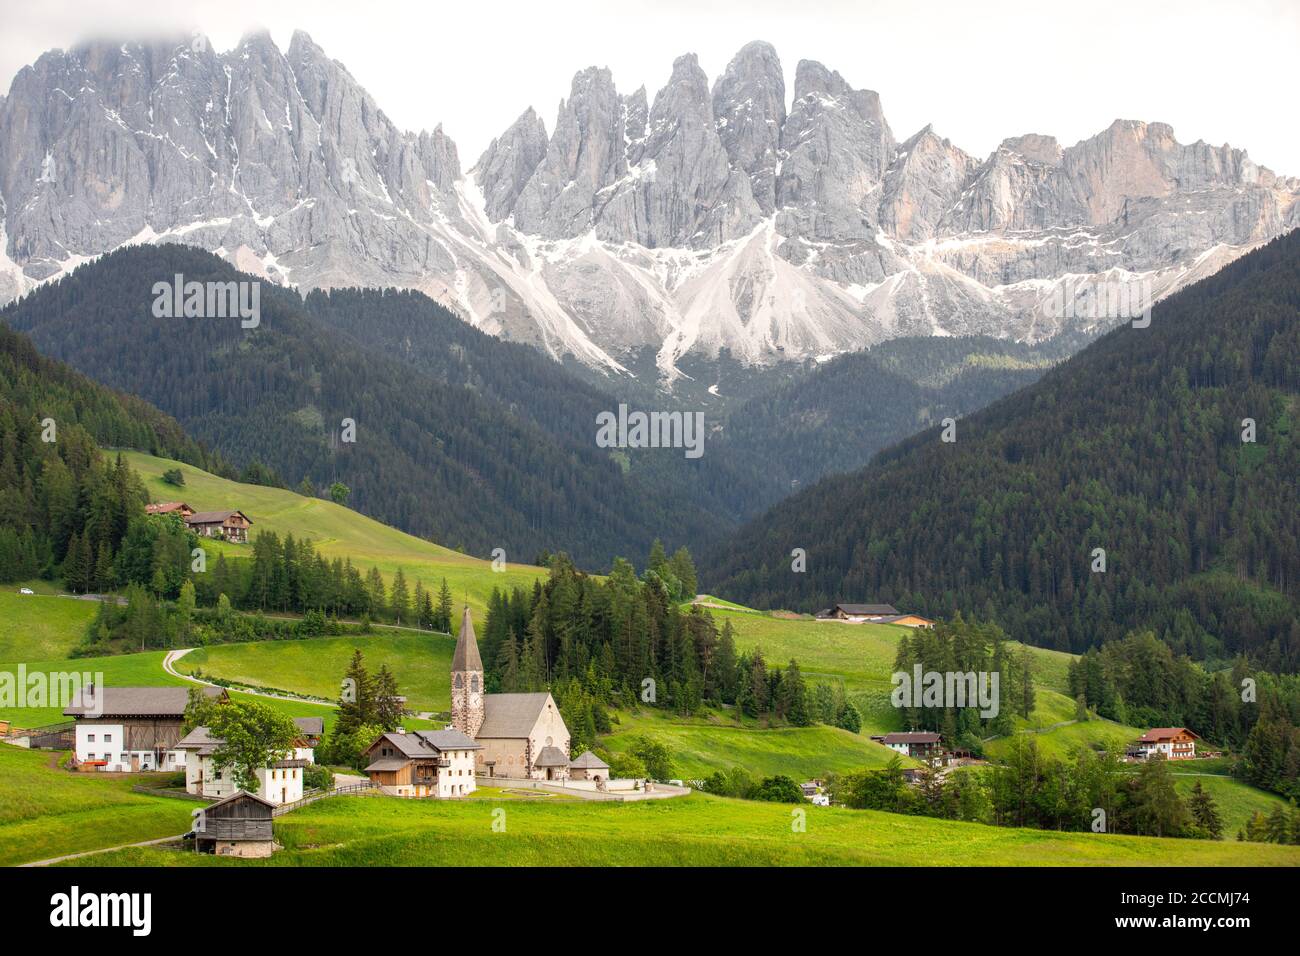 Iconic view of a northern Italian valley, with a small church surrounded by meadows and trees in the foreground and a mountain range in the background Stock Photo